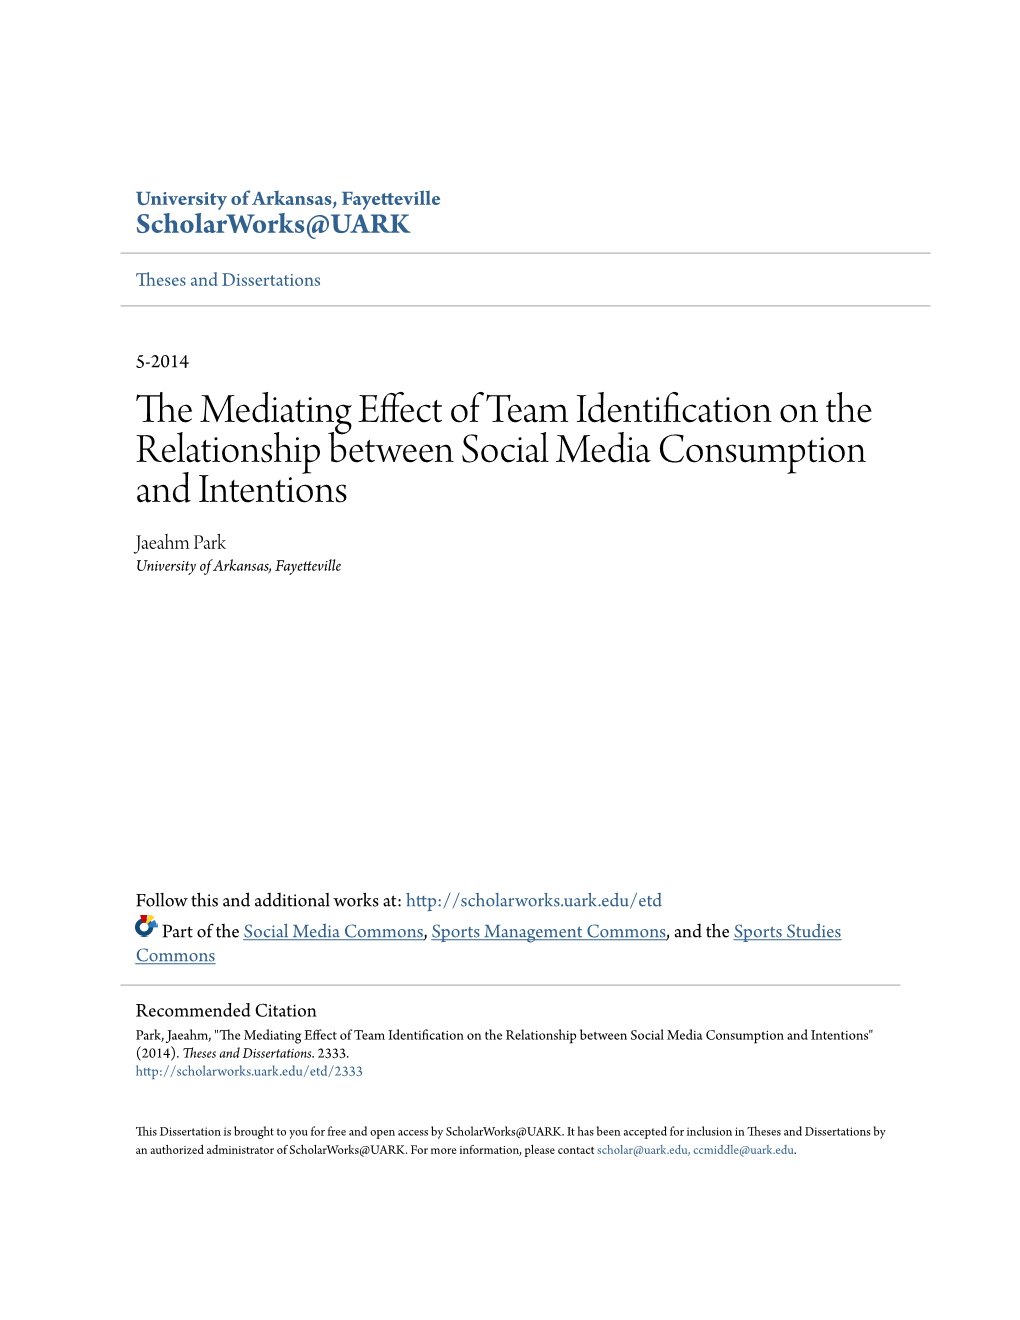 The Mediating Effect of Team Identification on the Relationship Between Social Media Consumption and Intentions